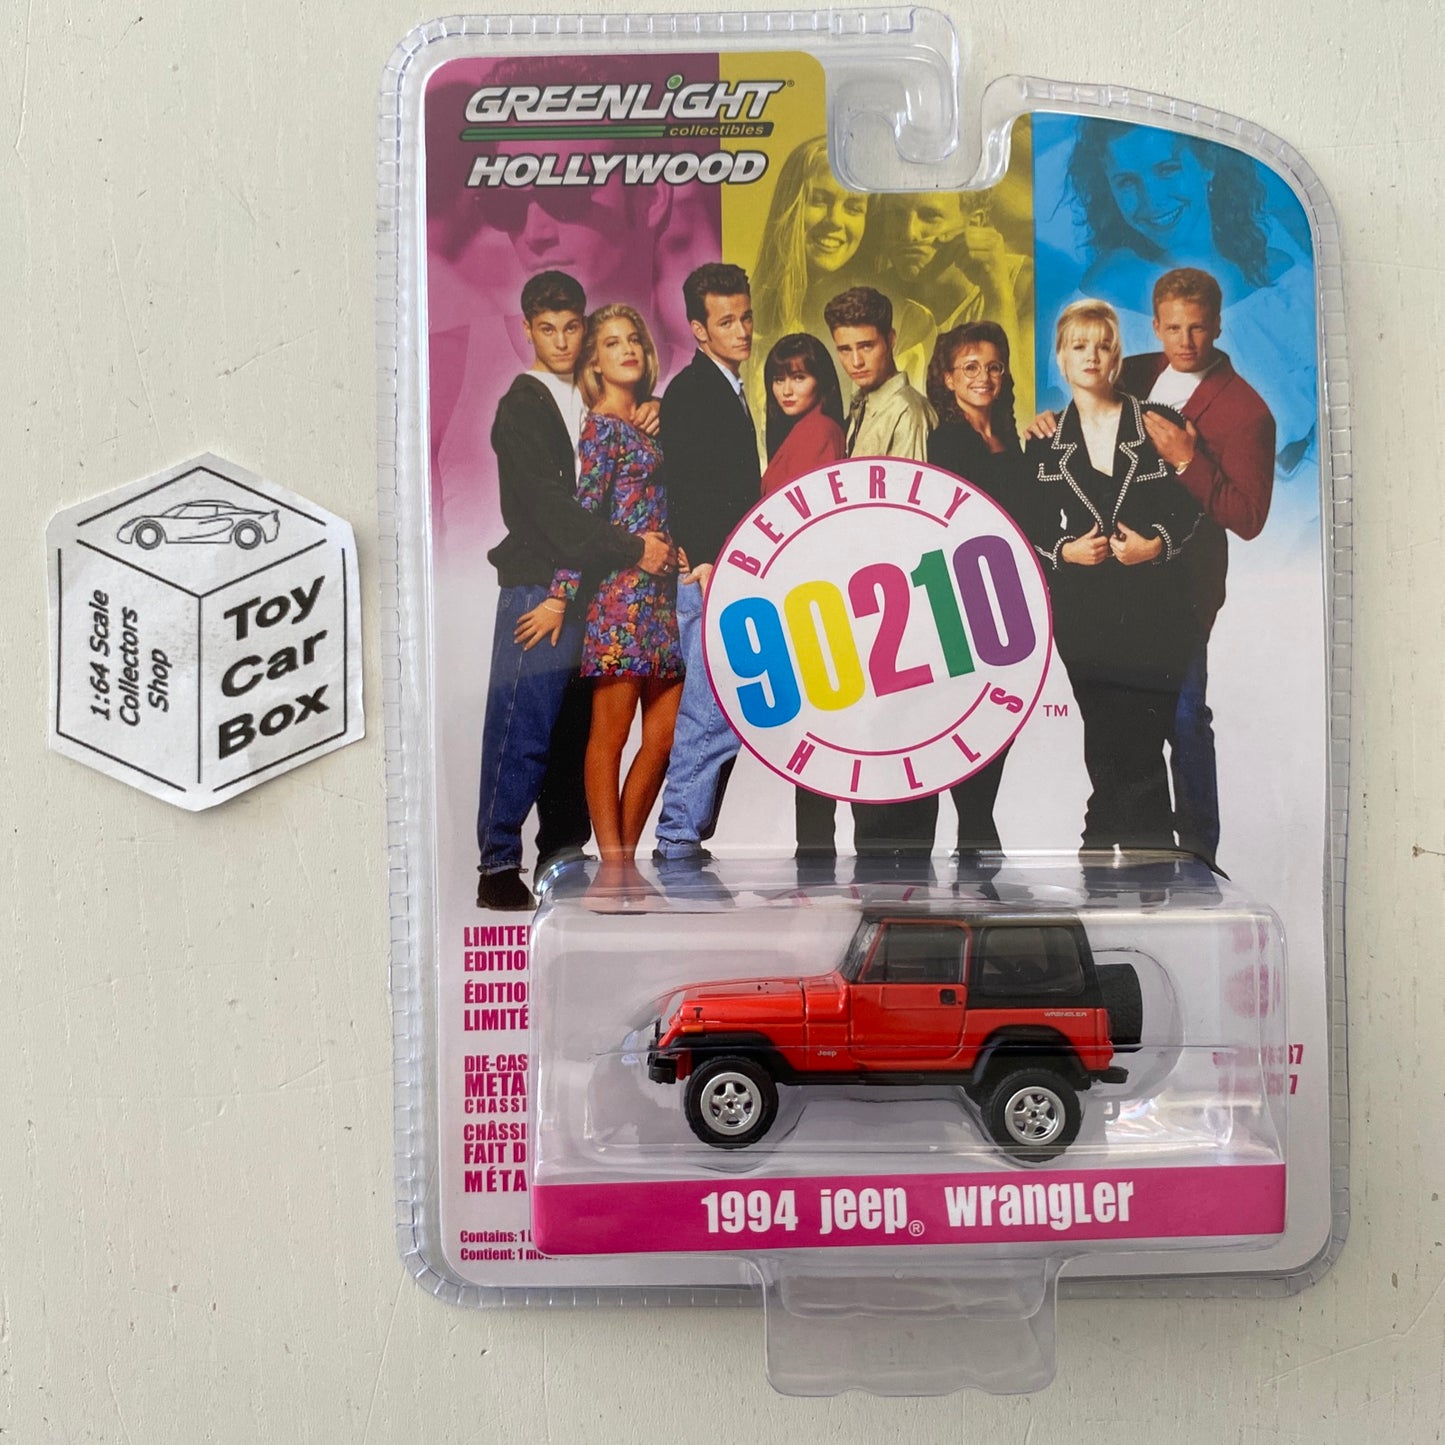 GREENLIGHT - 1994 Jeep Wrangler (90210 - 1:64 Scale - Hollywood Series 37) J95